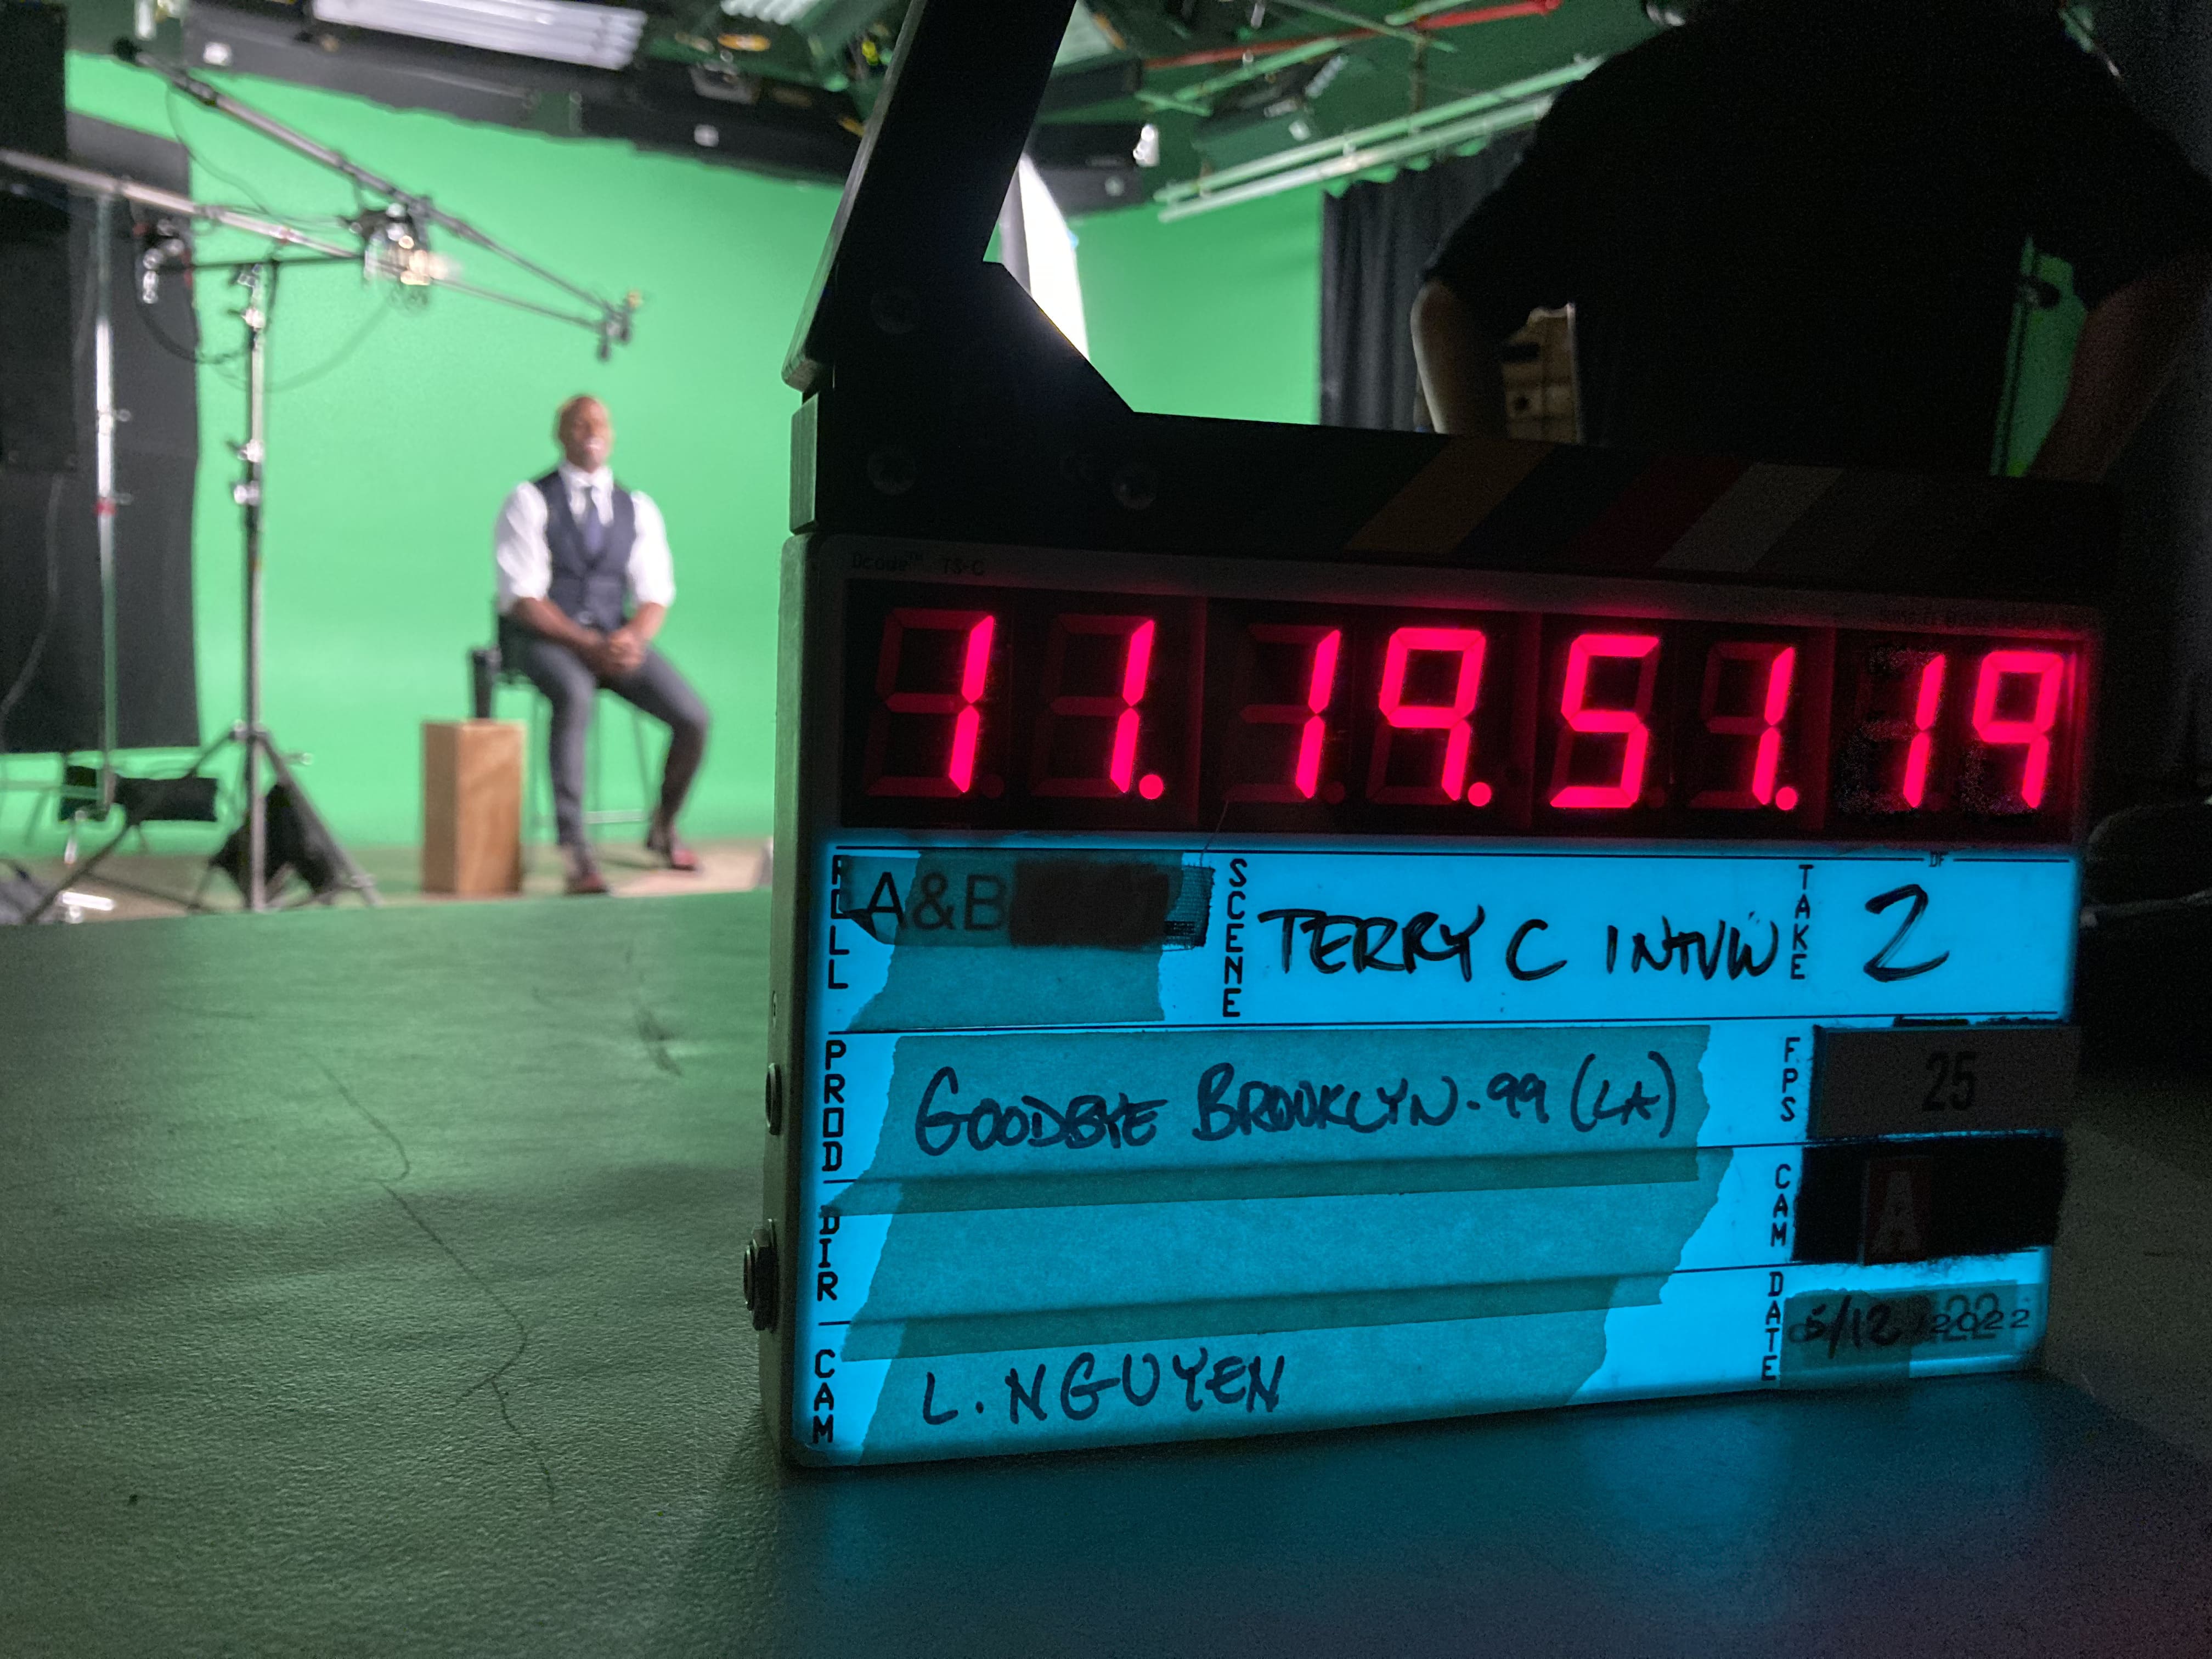 Terry Crews (Lieutenant Terry Jeffords) sits in front of a green screen in the background. In the foreground is a clapperboard